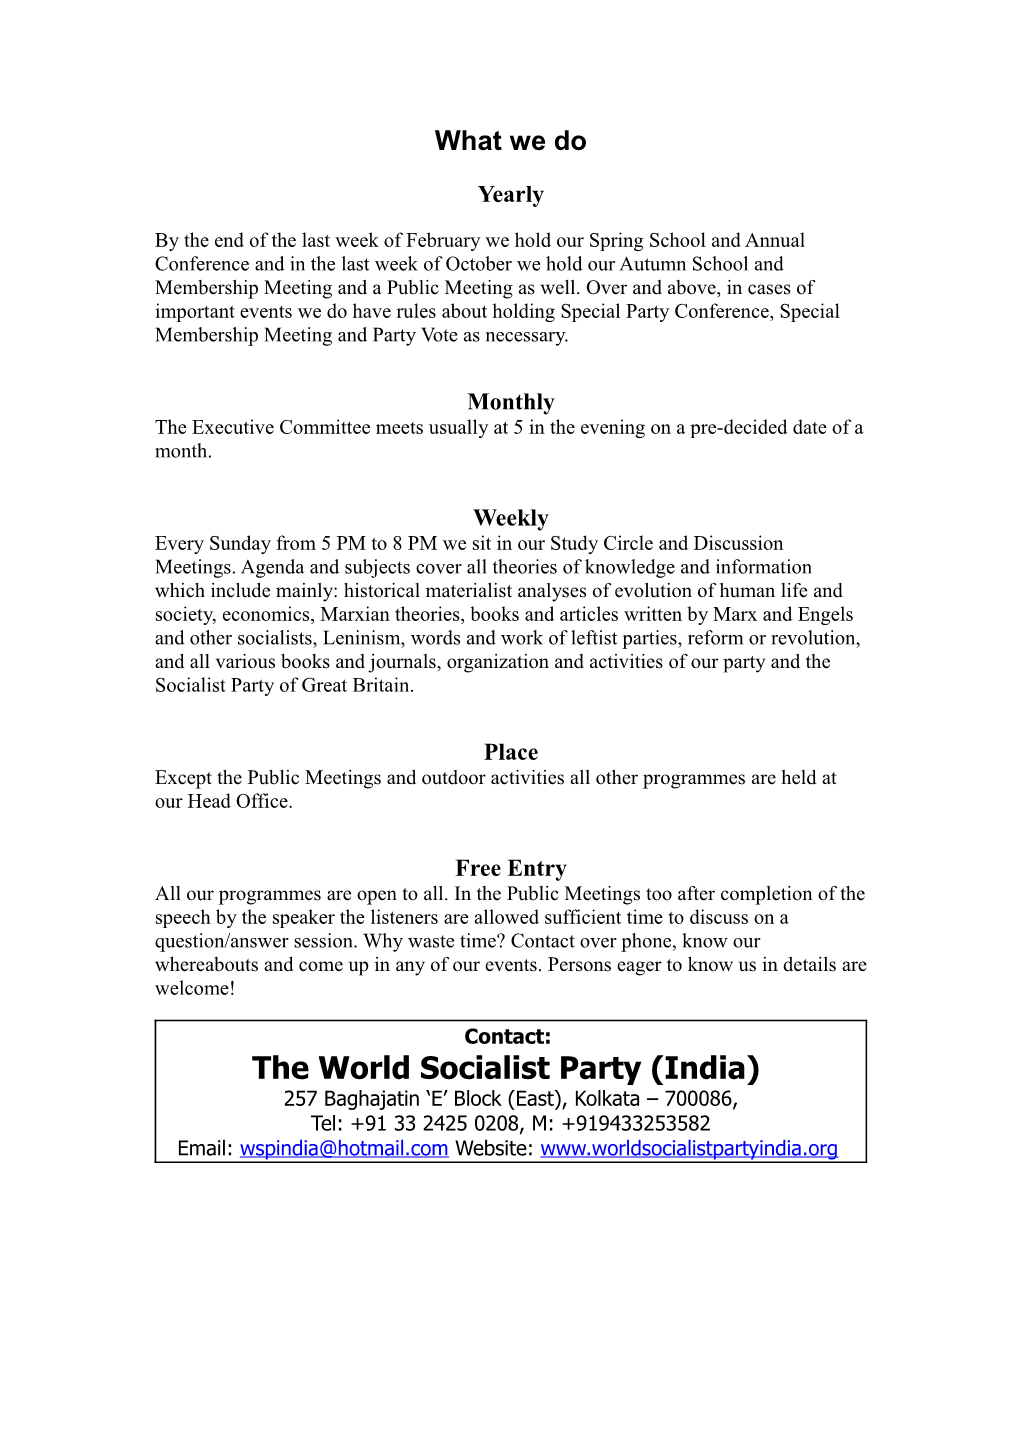 The World Socialist Party (India)